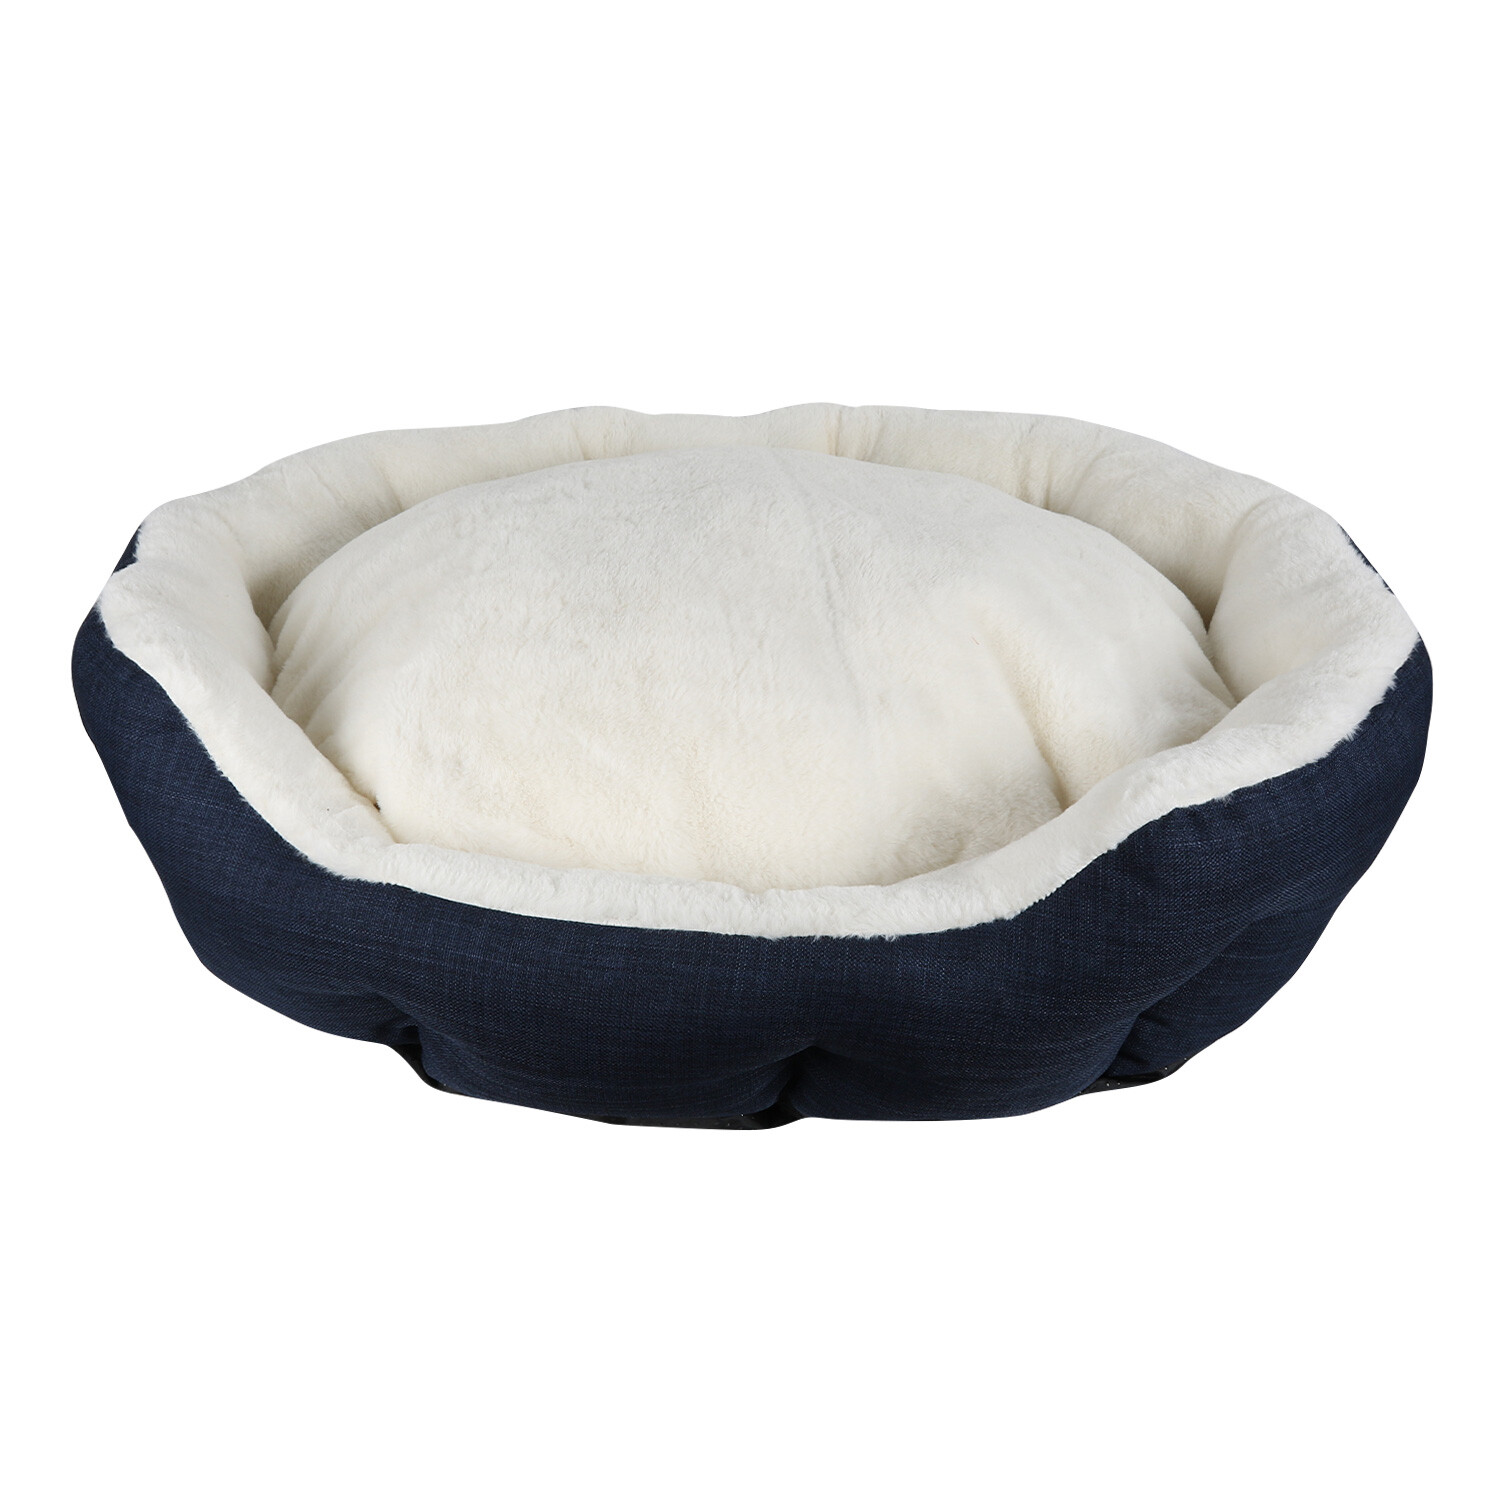 Clever Paws Medium Navy Soft Dog Bed Image 1